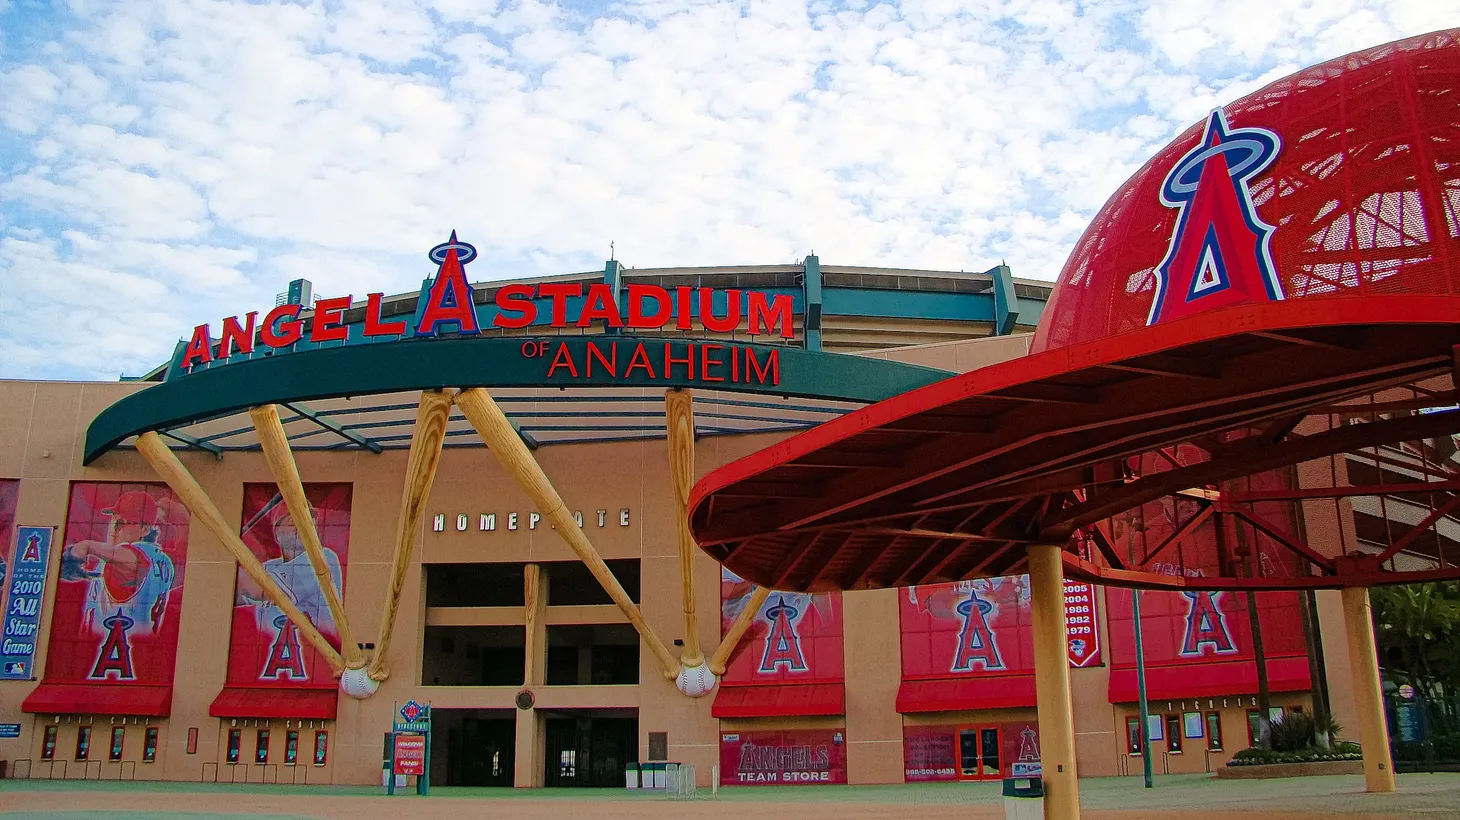 According to the SportsLine Projection System, the Angels have just a 5.7% chance of making the playoffs this year.